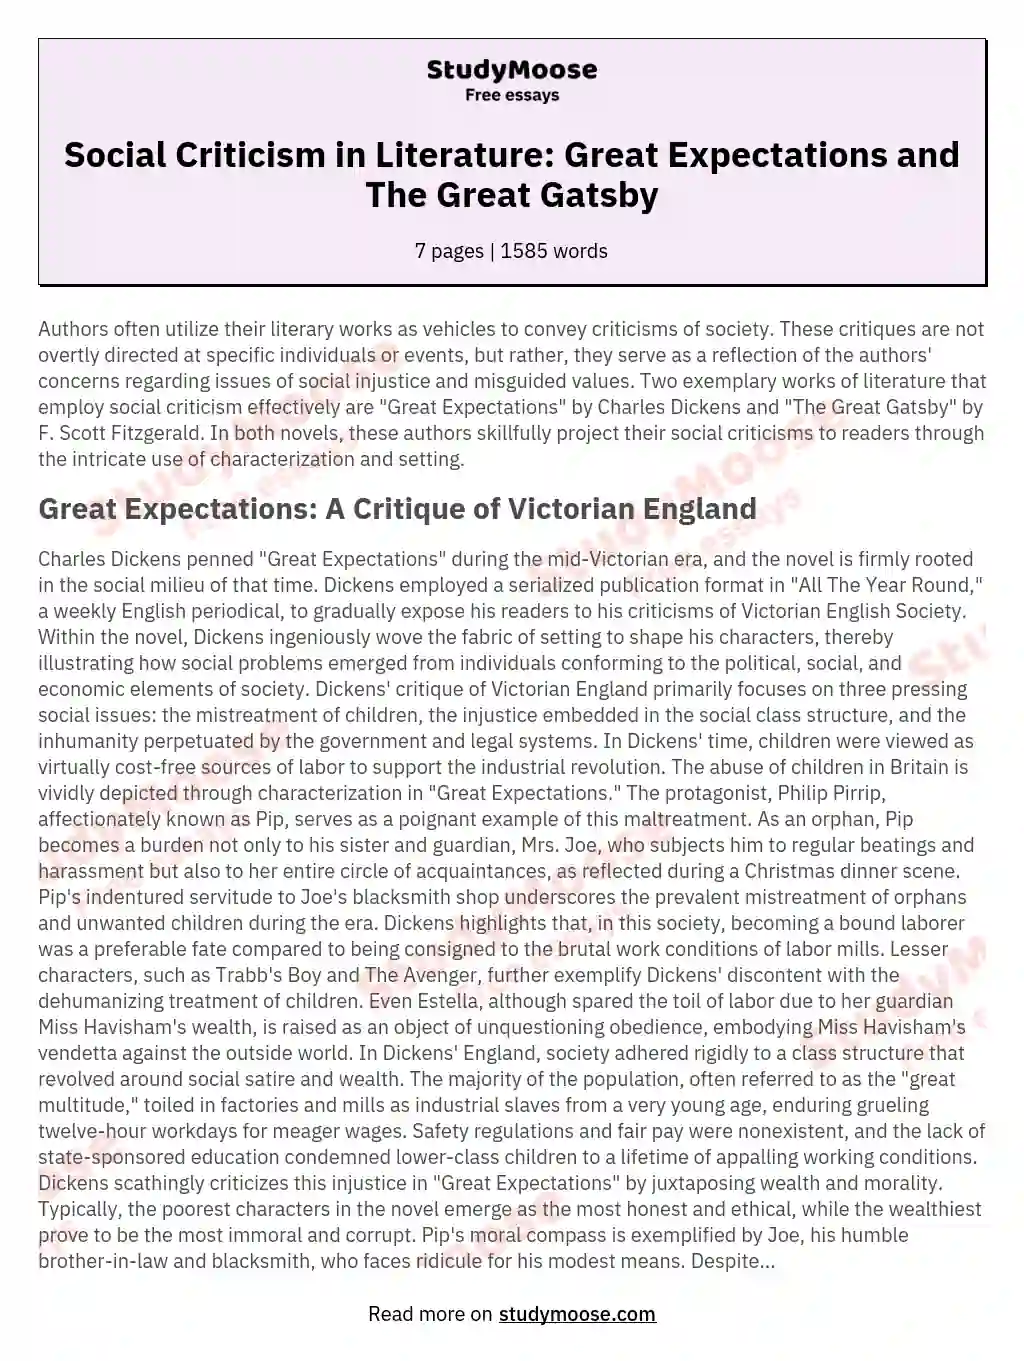 Social Criticism in Literature: Great Expectations and The Great Gatsby essay